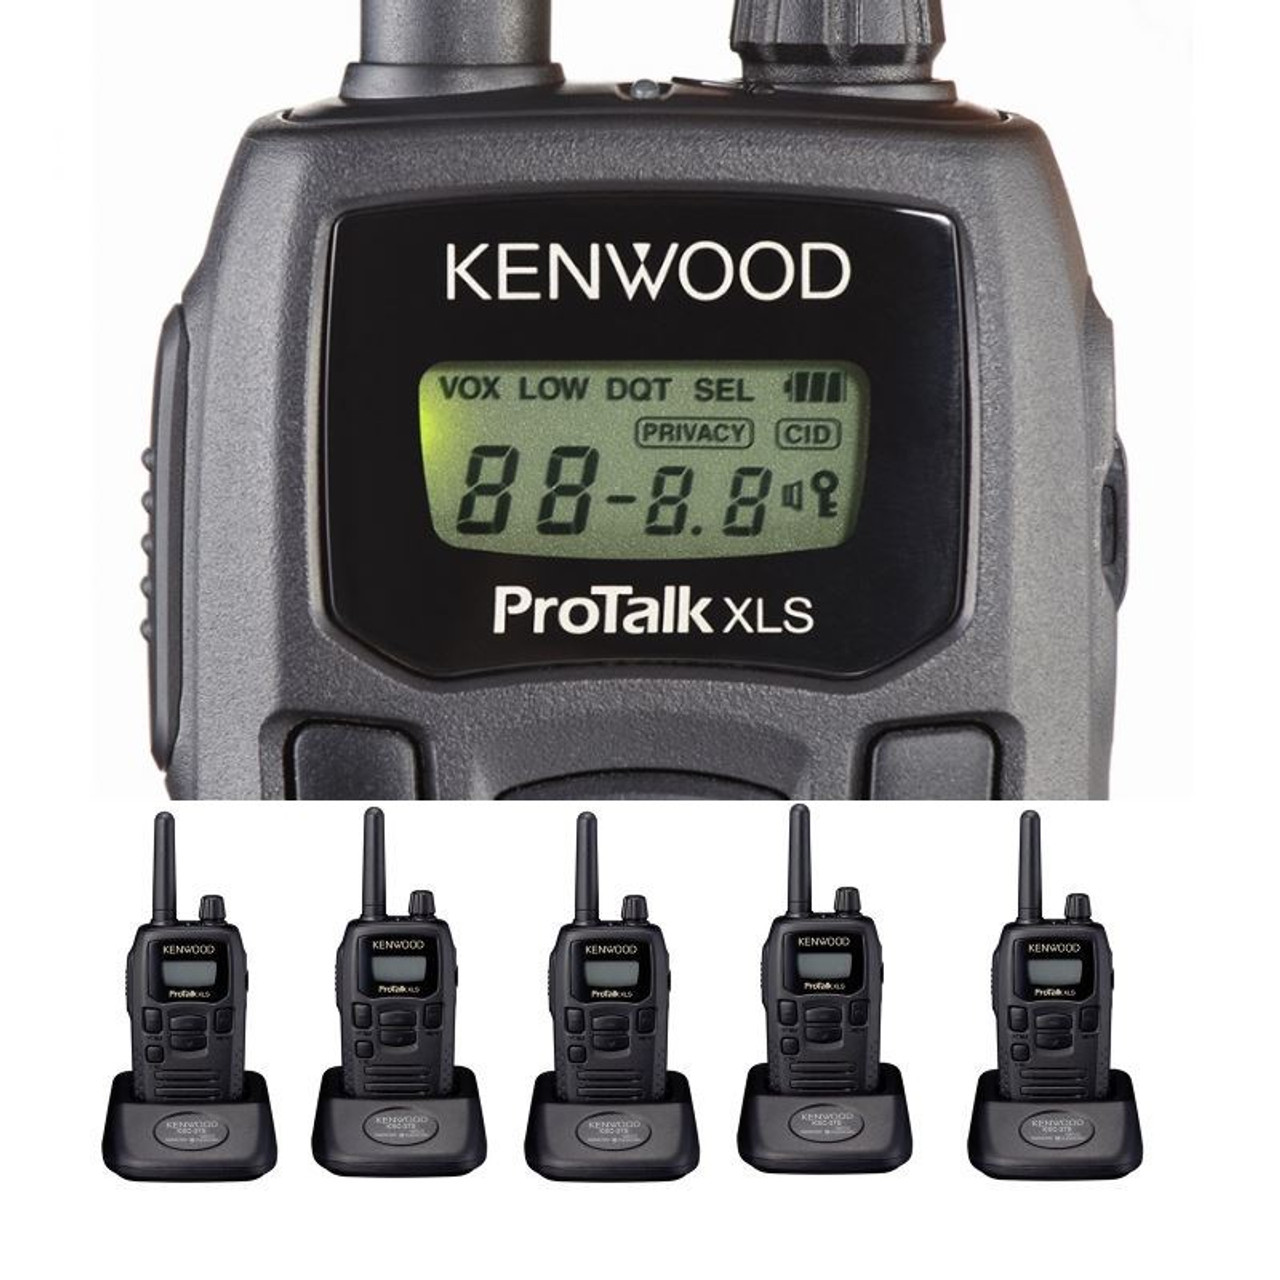 Kenwood ProTalk KBH-10 replacement belt clips TK2300VP Spring Action clip  for TK series radios. Free Shipping!